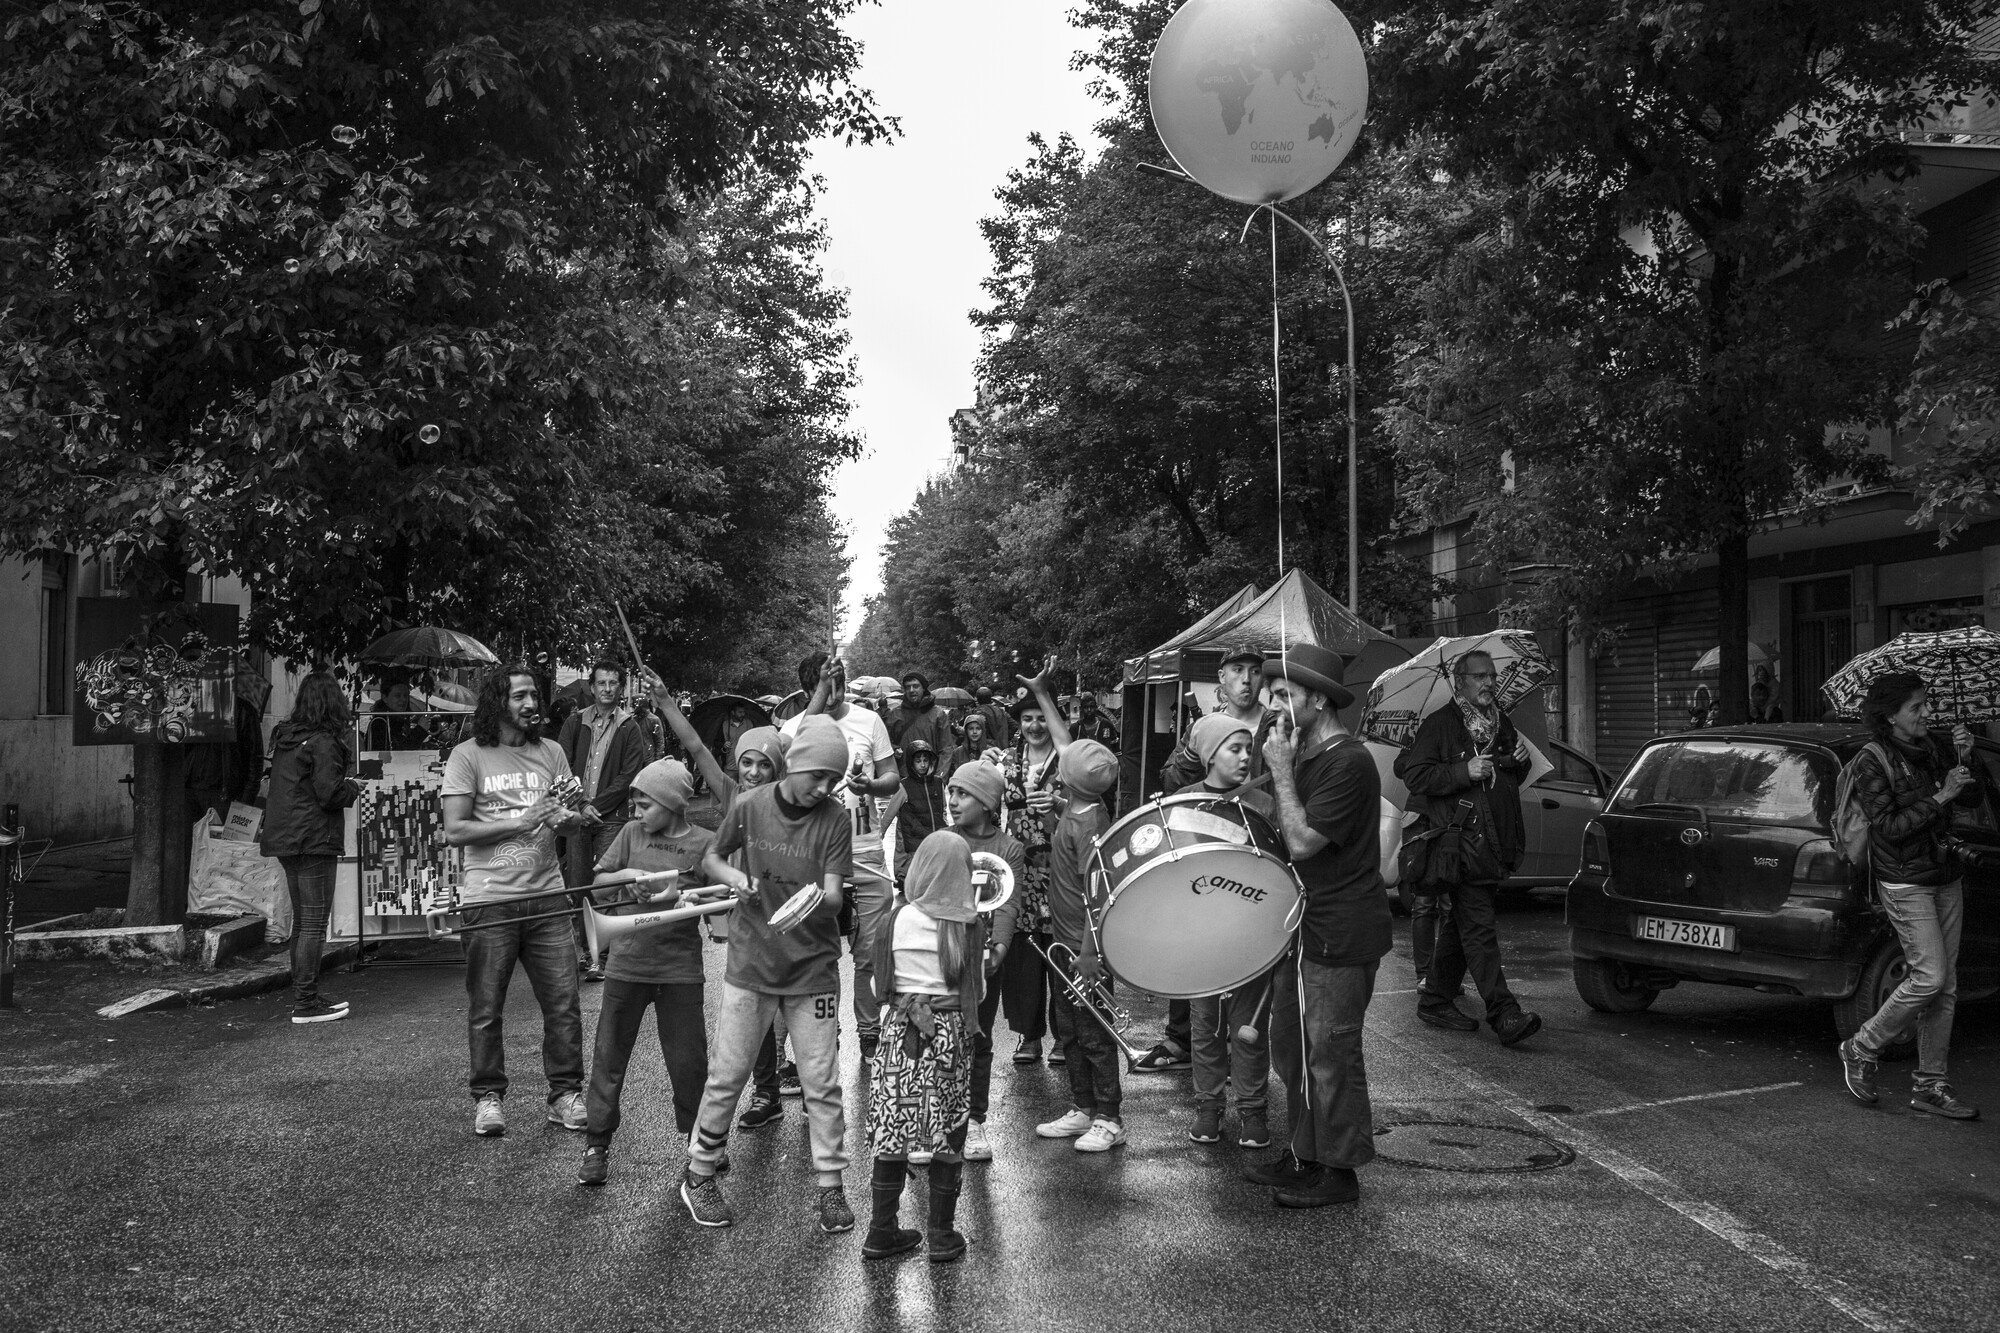 A marching band of adults and children in the street.